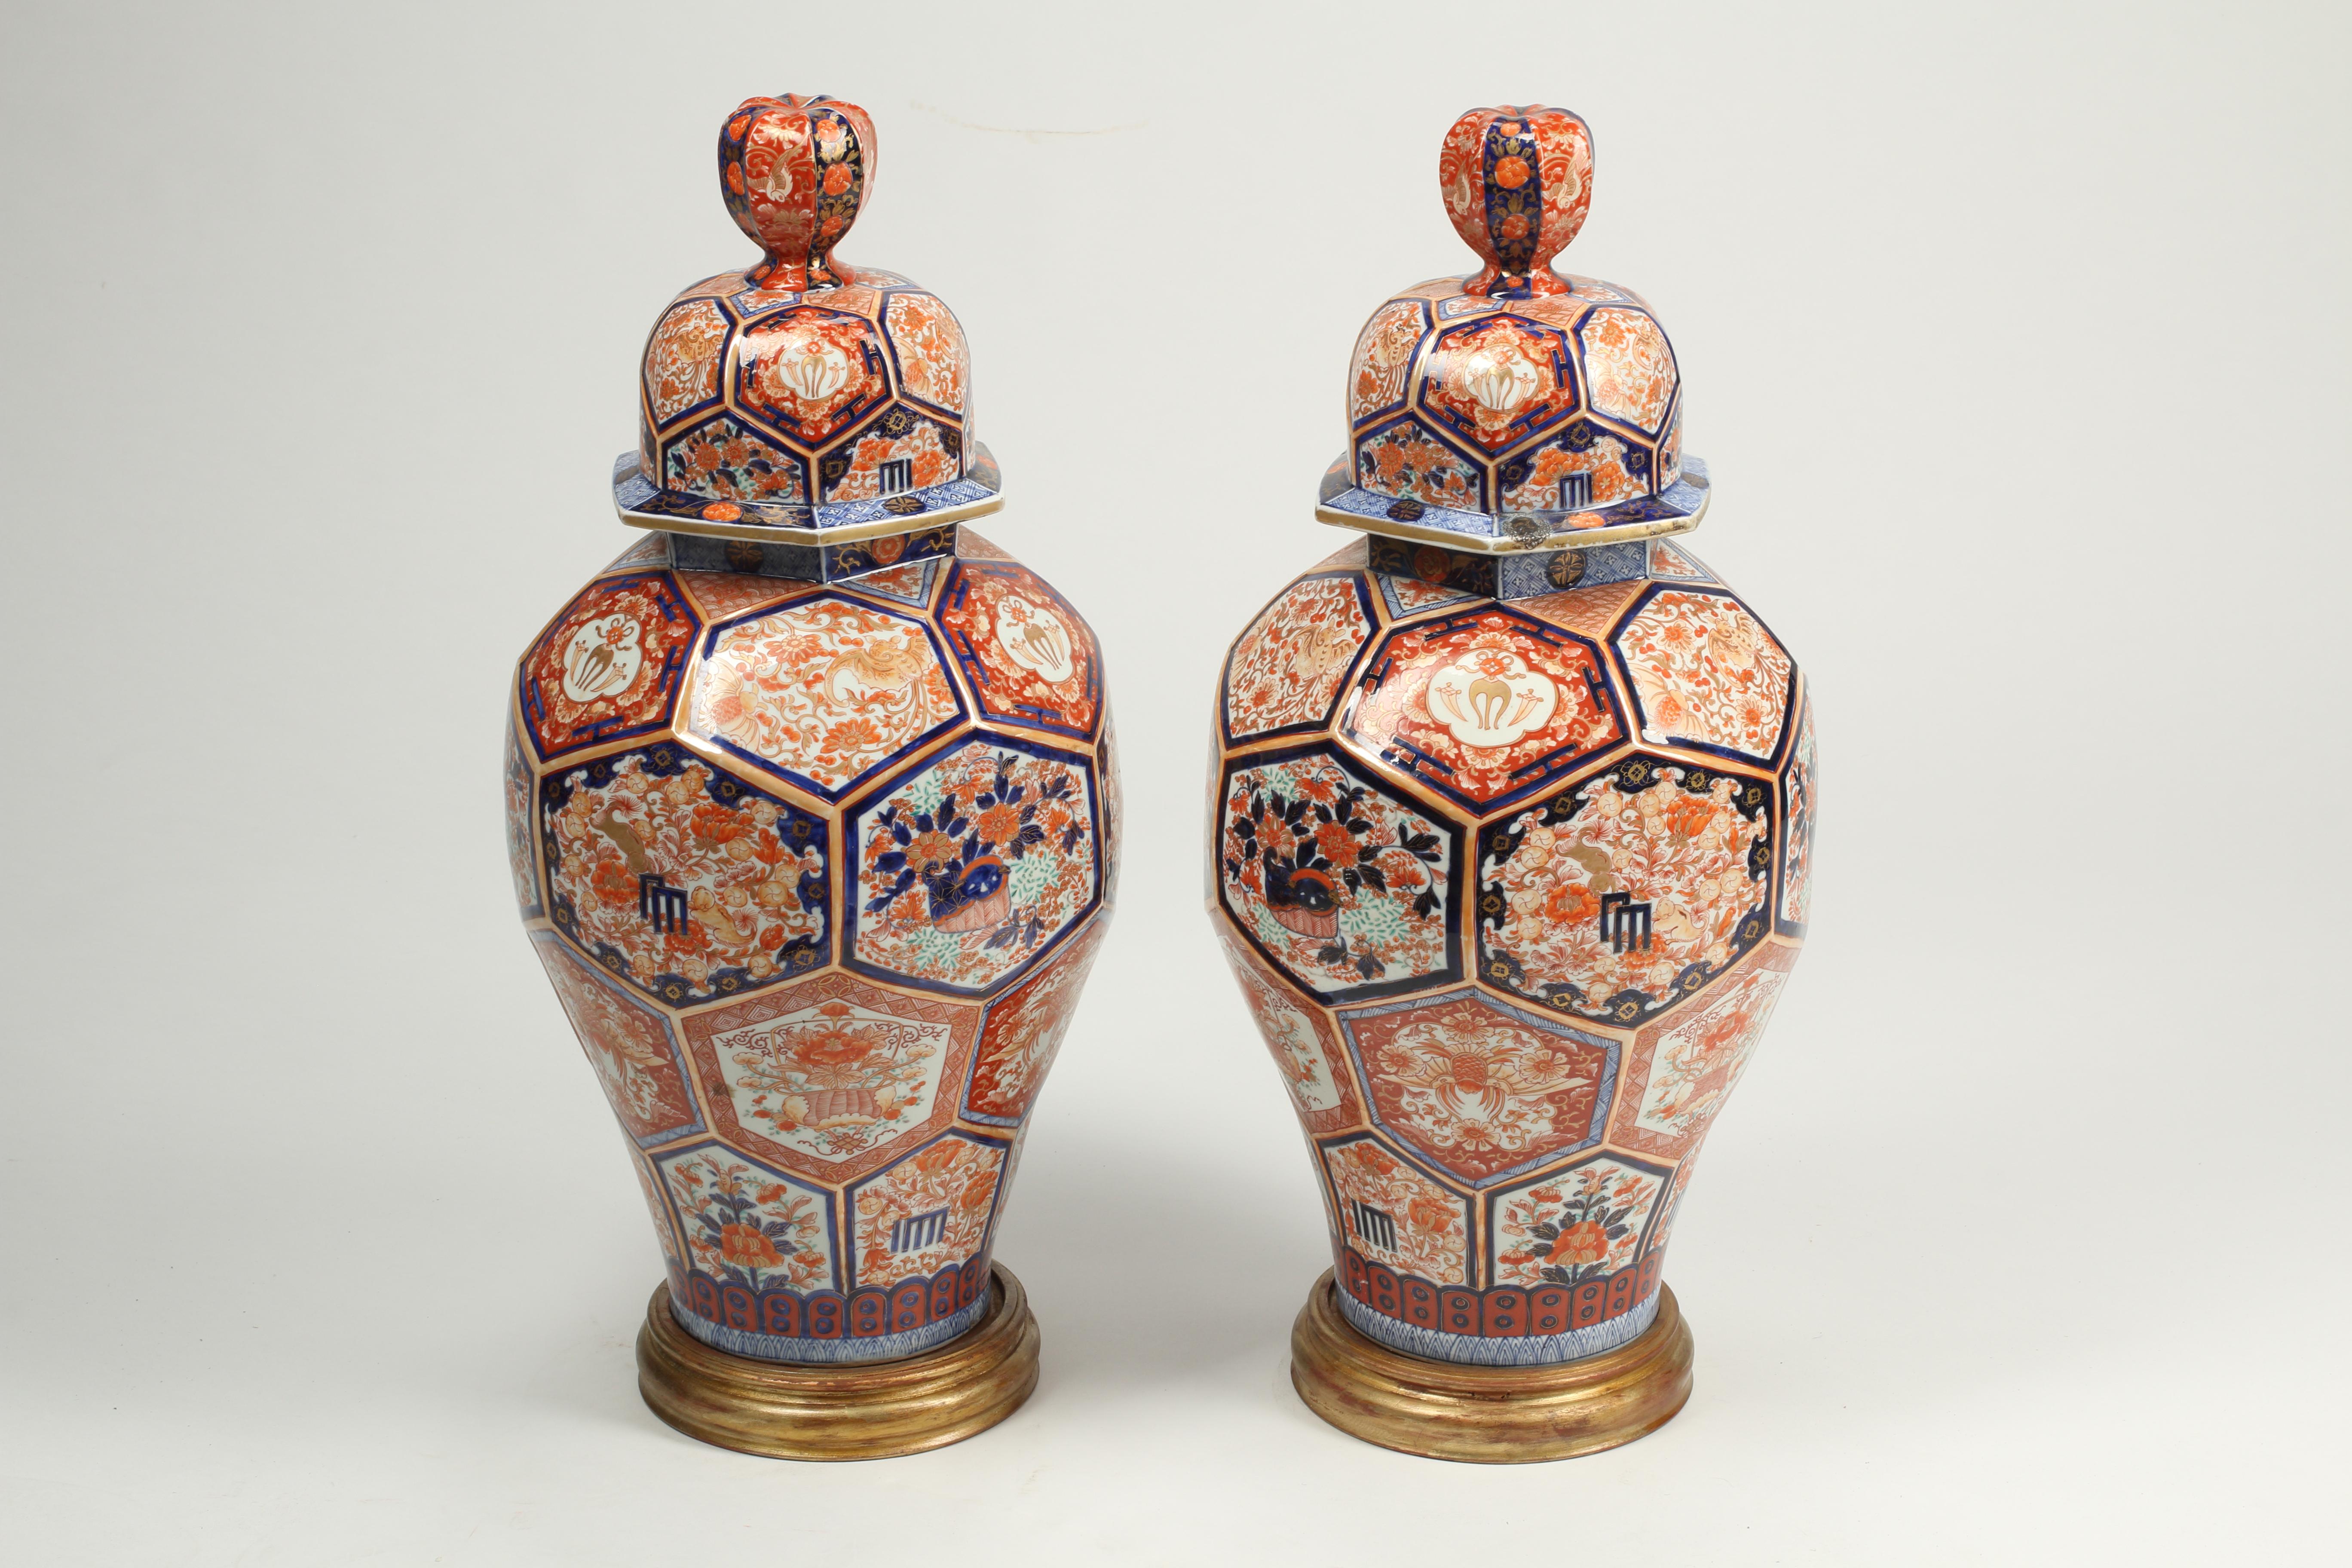 An exceptional pair of large scale late 19th century Japanese Imari temple jars from the Meiji period with covers, also can be referred to as ginger jars. Rare octagonal facet cuts and superb painting make these an exemplary decorative pair.